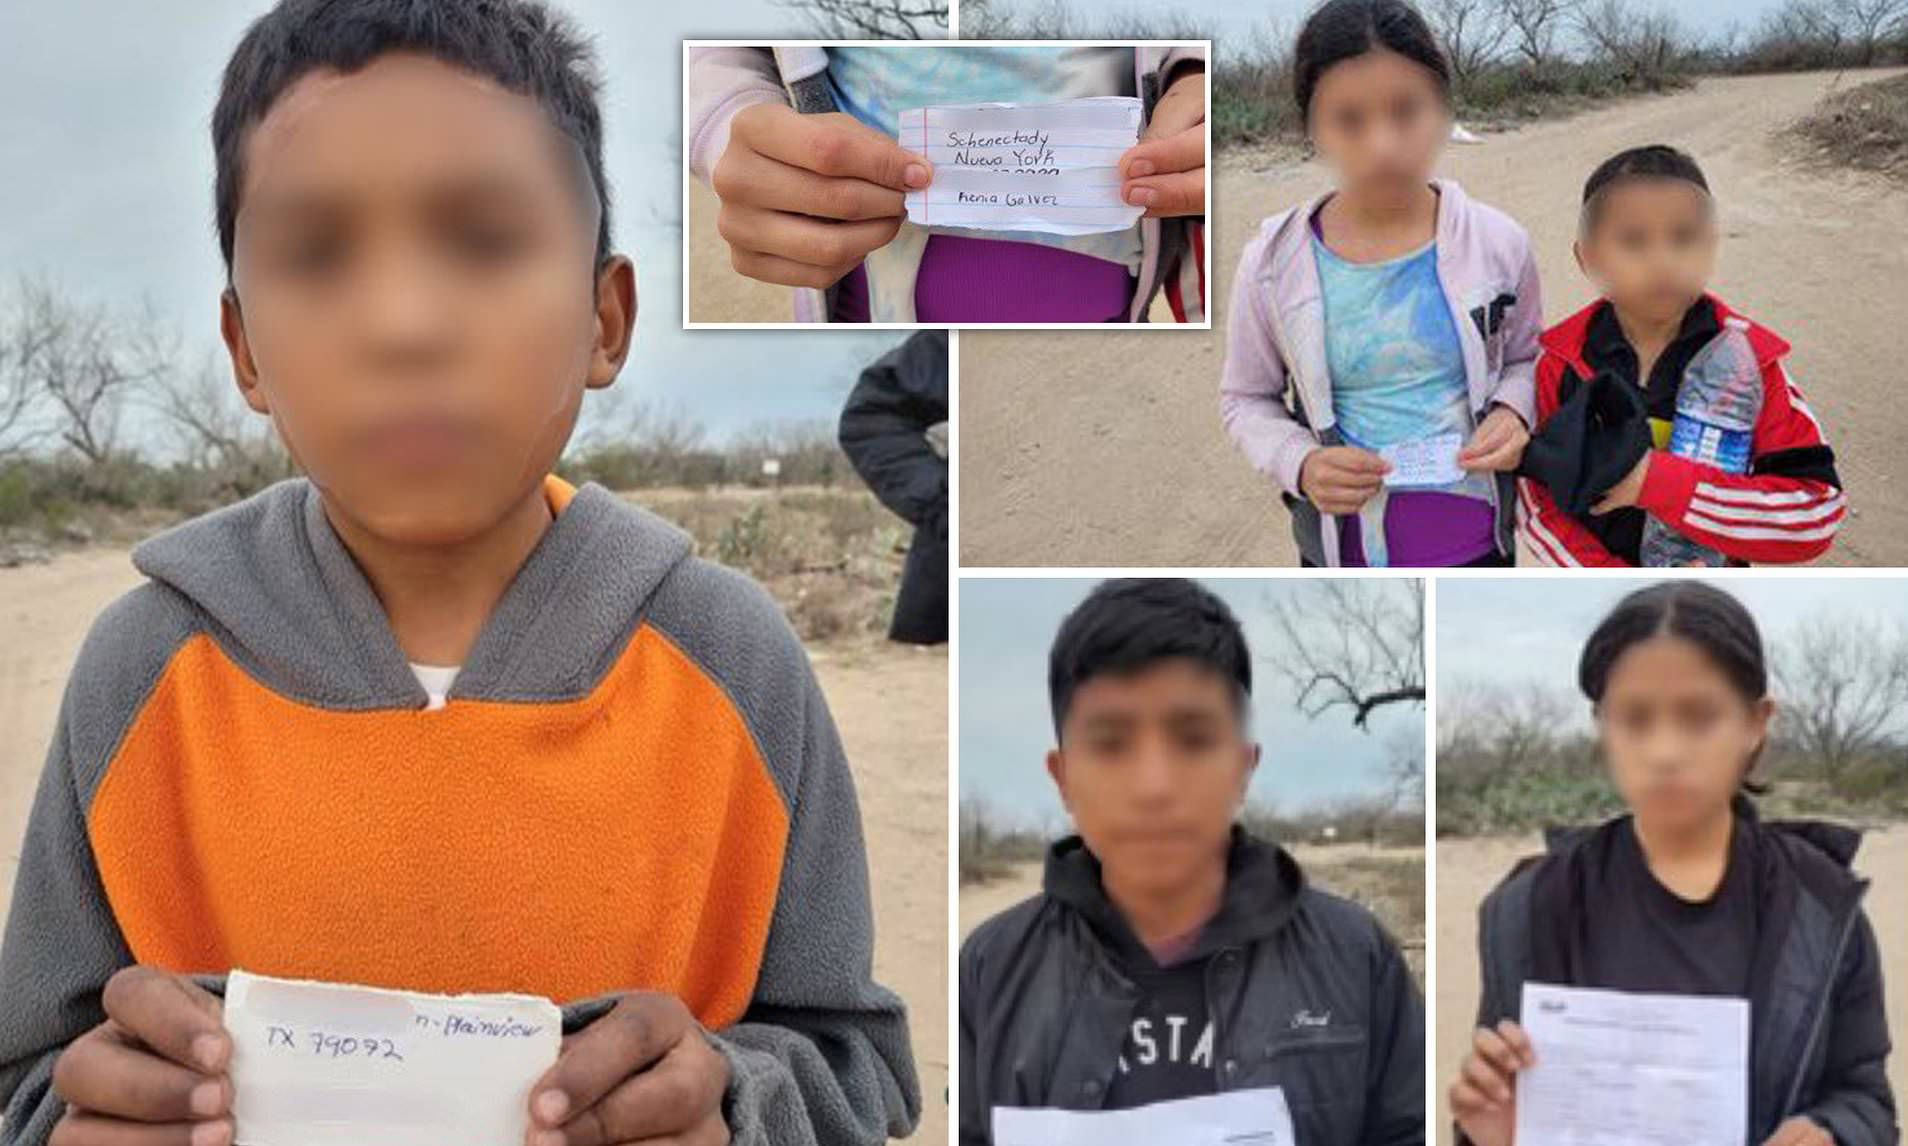 Texas Border Patrol agents find FIVE unaccompanied kids on border carrying pieces of paper with addresses in Empire State